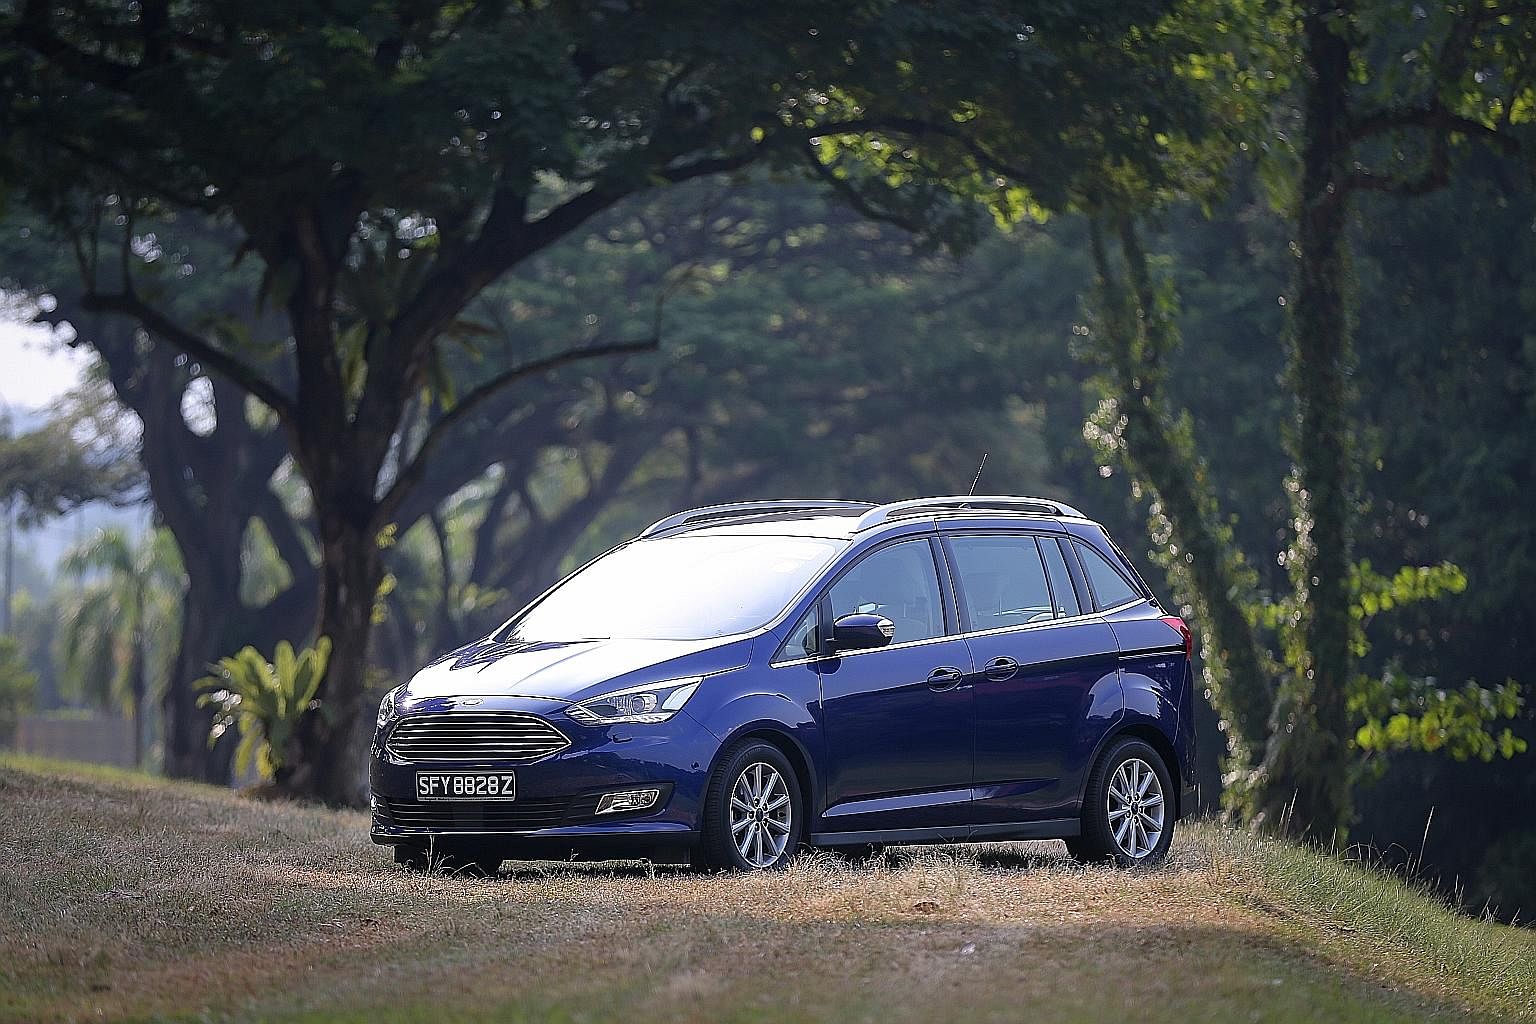 Ford C Max Gets An A Motoring News Top Stories The Straits Times